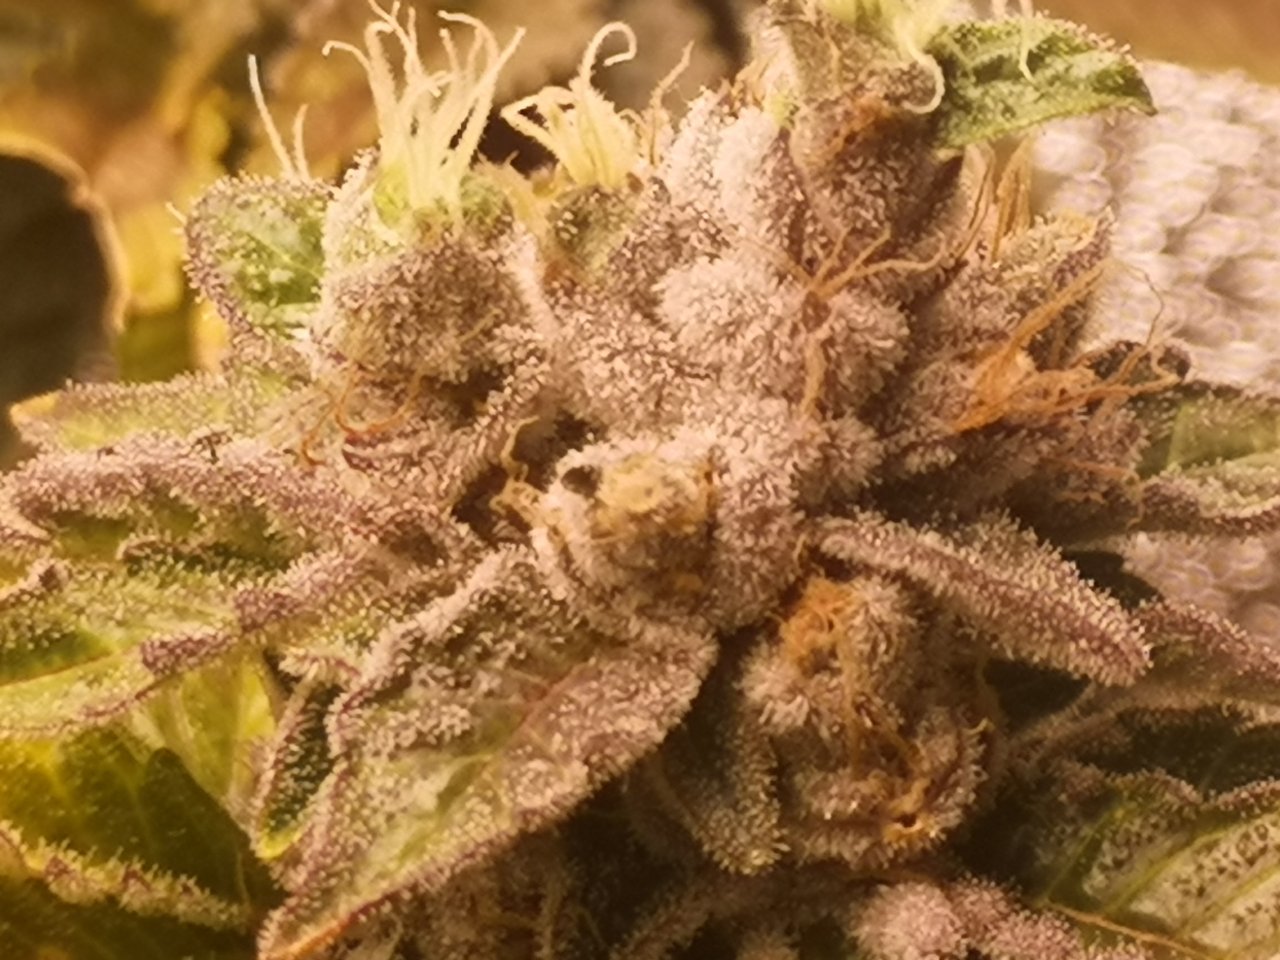 Blue Cheese - w8d7 - 15/15 ripening - 4